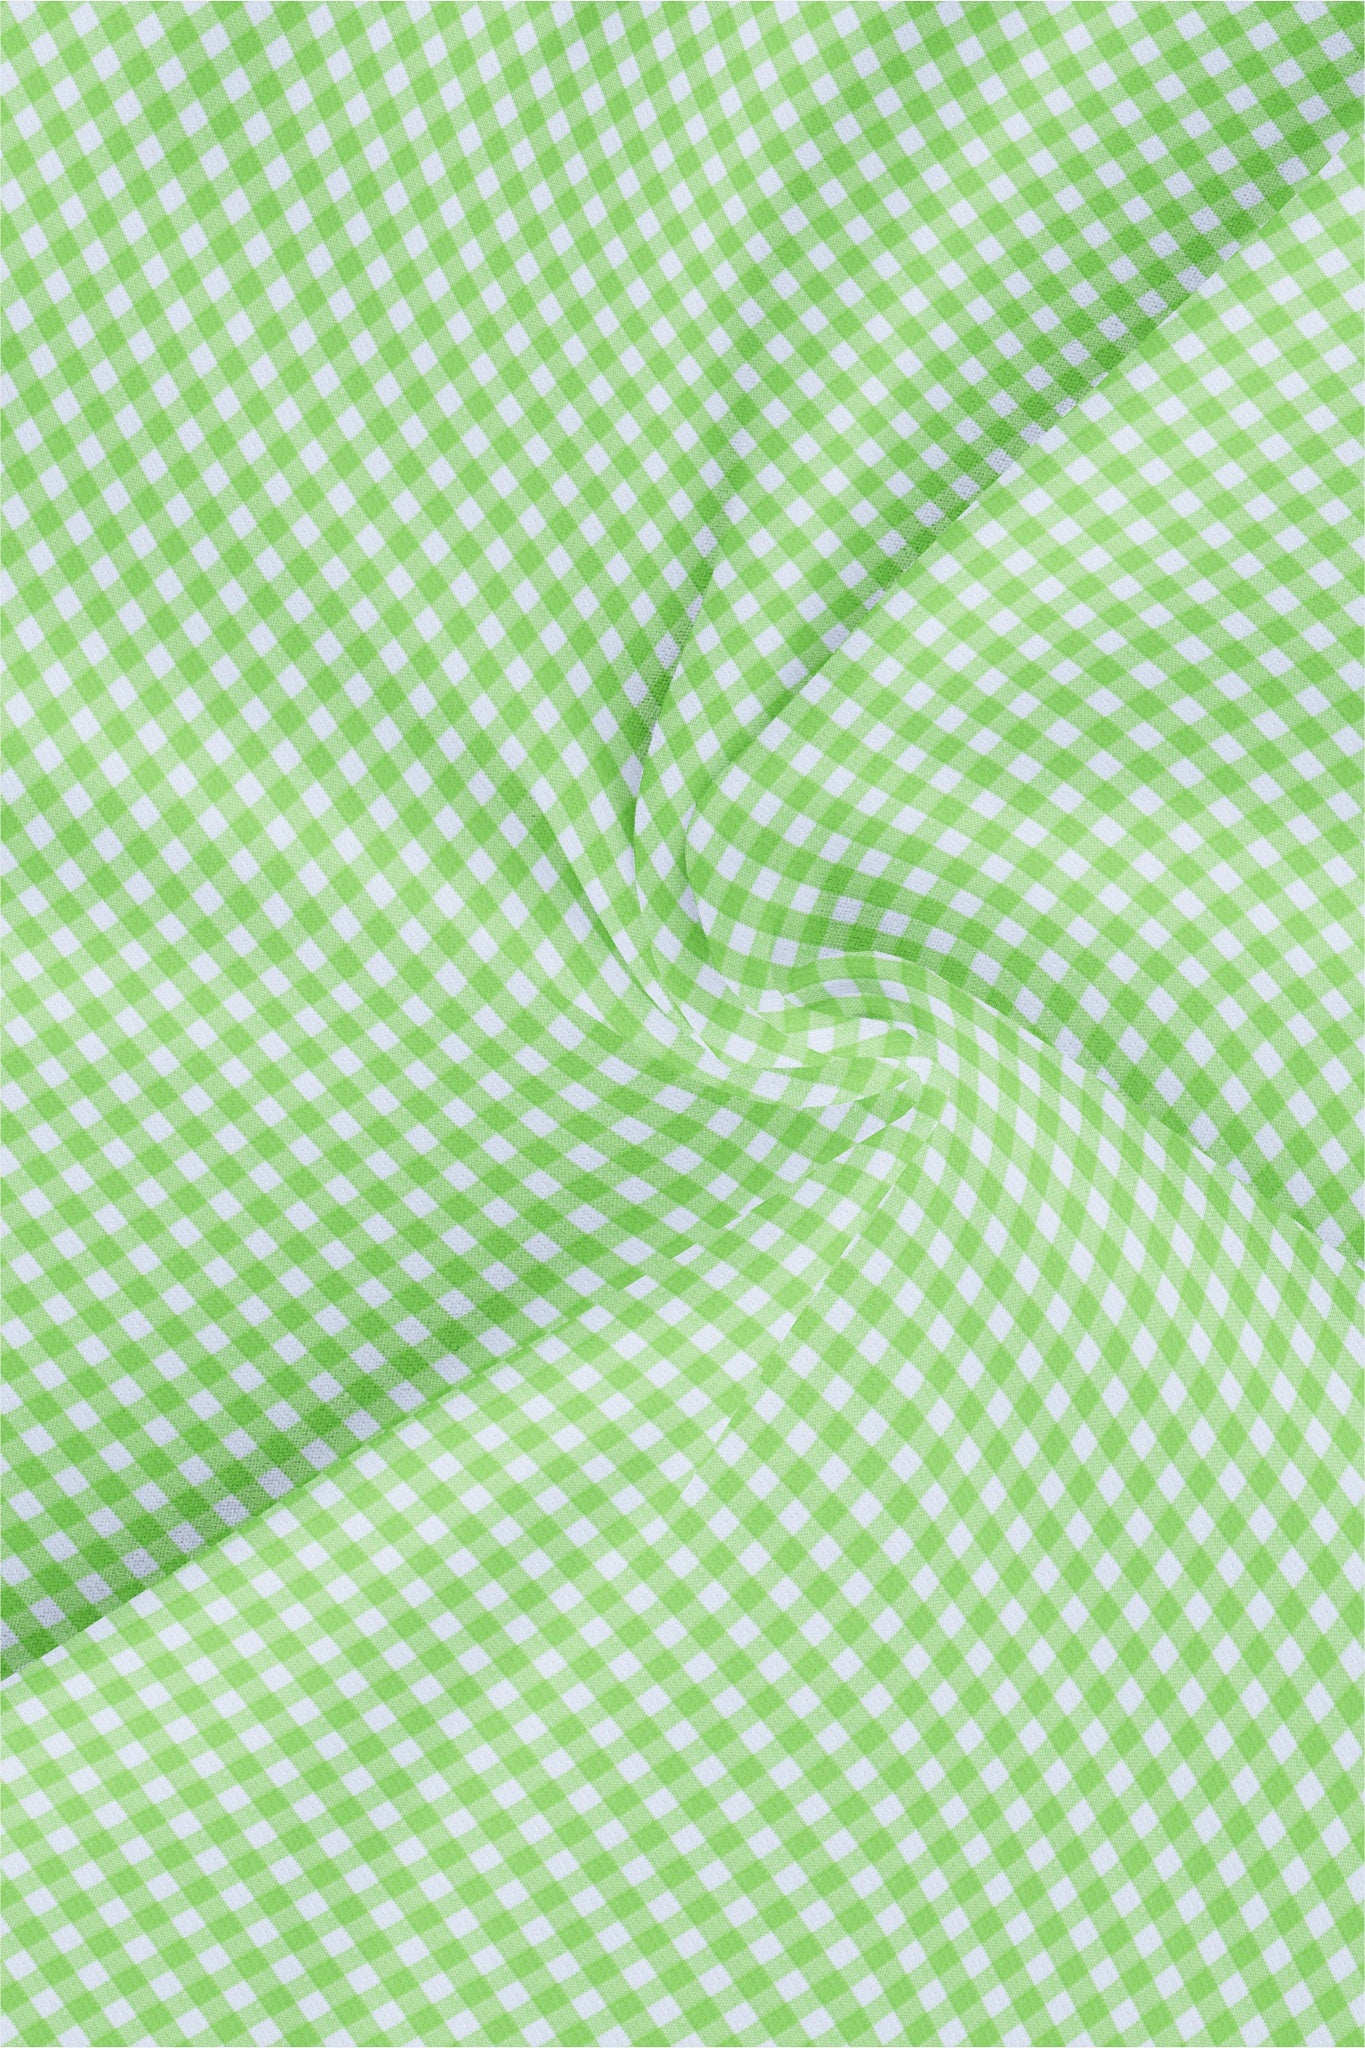 White with Lime Green Gingham Checks Cotton Shirt